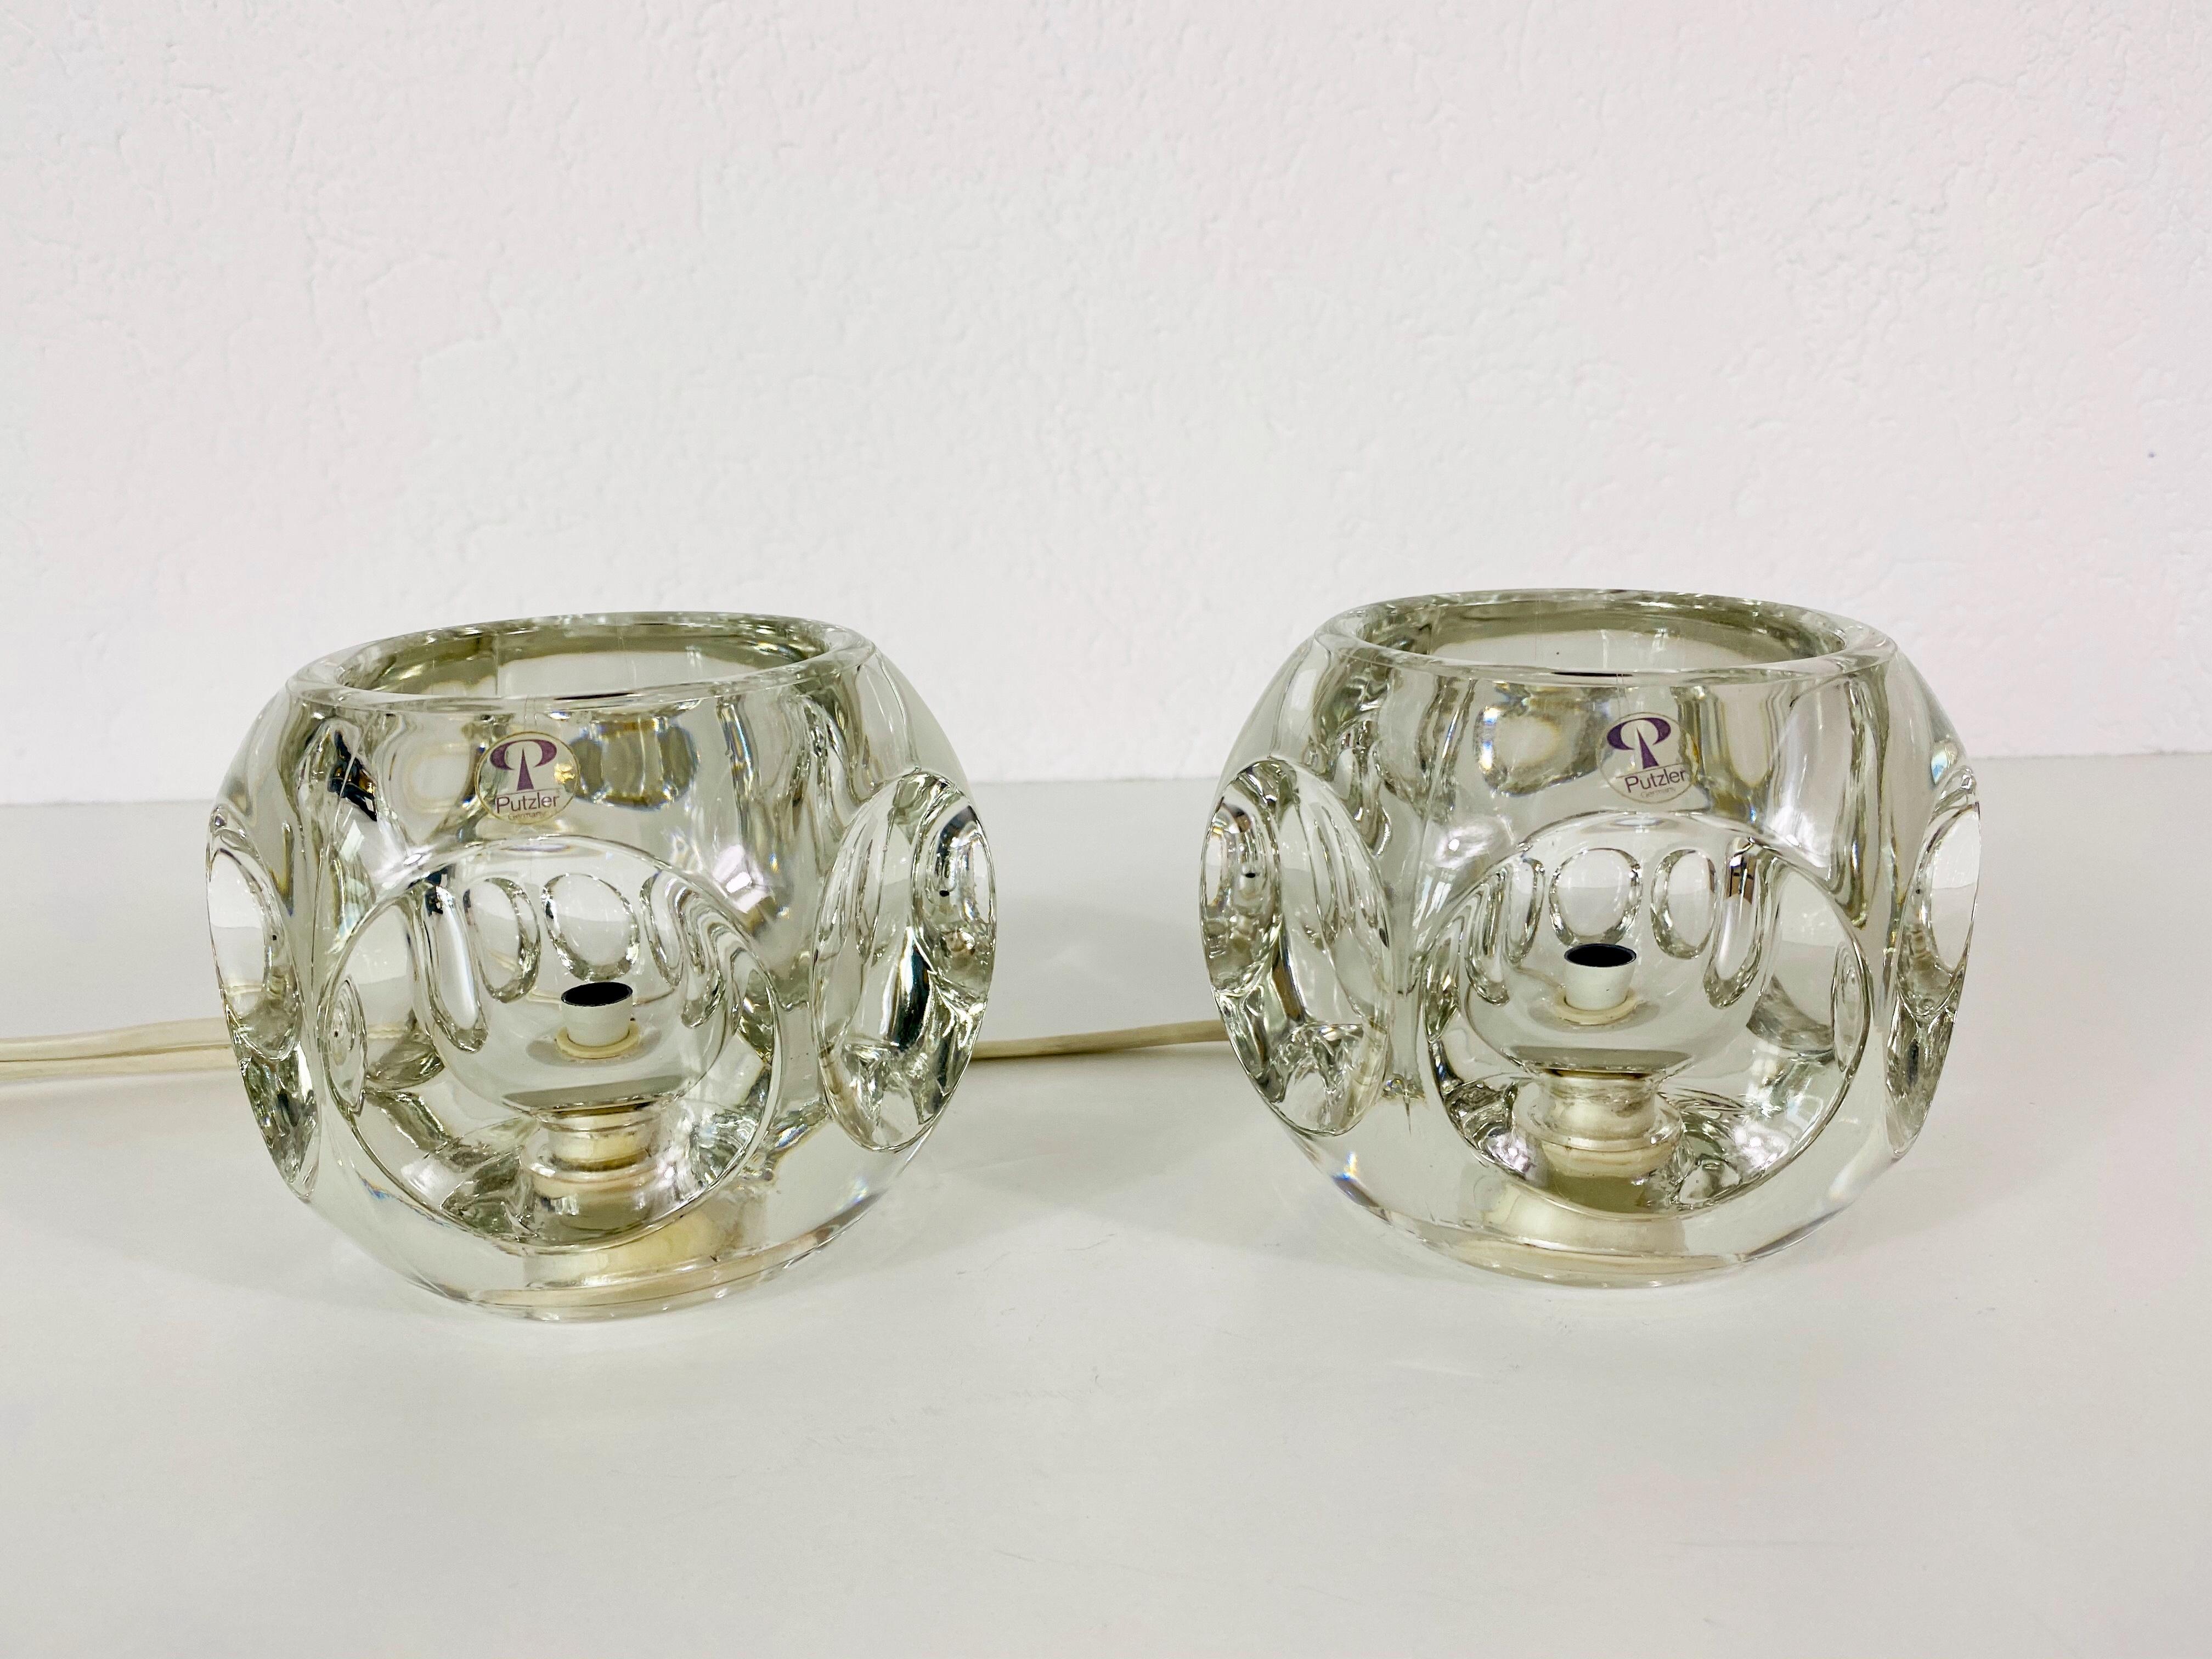 A beautiful pair of table lamps by Peill & Putzler made in Germany in the 1970s. They have a cube shape and are made of transparent ice glass. The original brand label is on both of the lights. They are in very good vintage condition.

The light